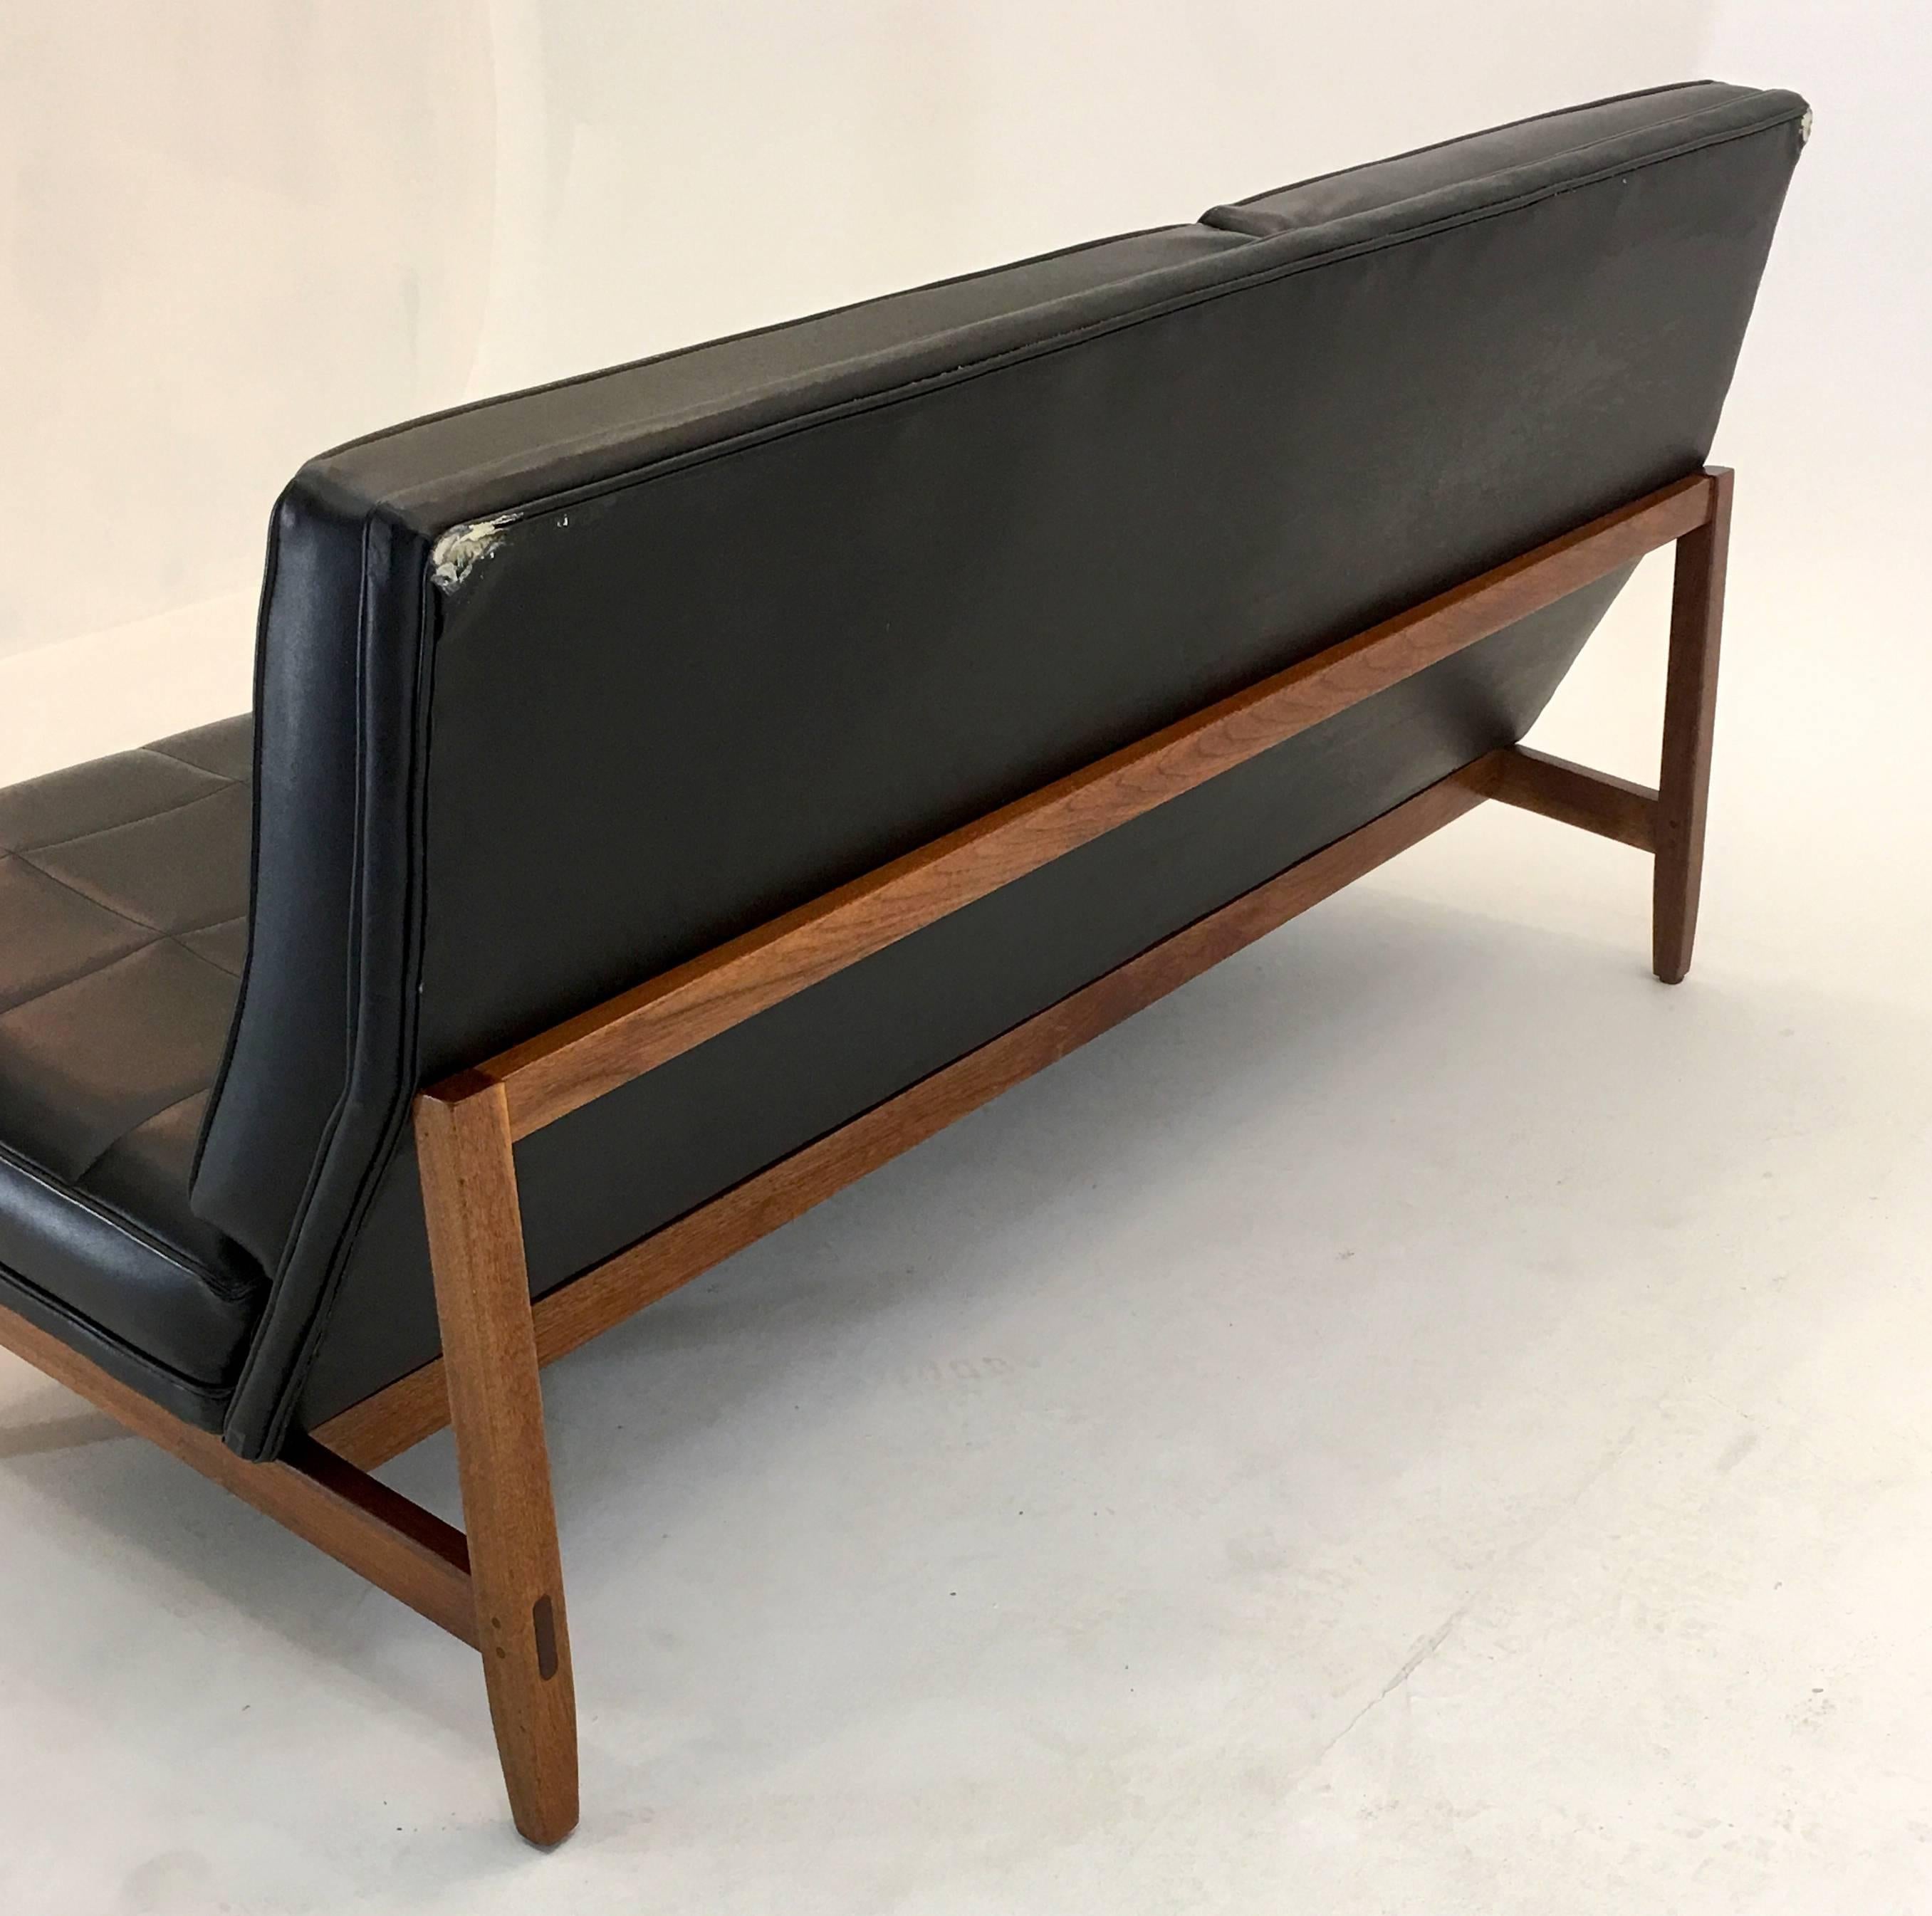 American Walnut Settee by Florence Knoll, 1952